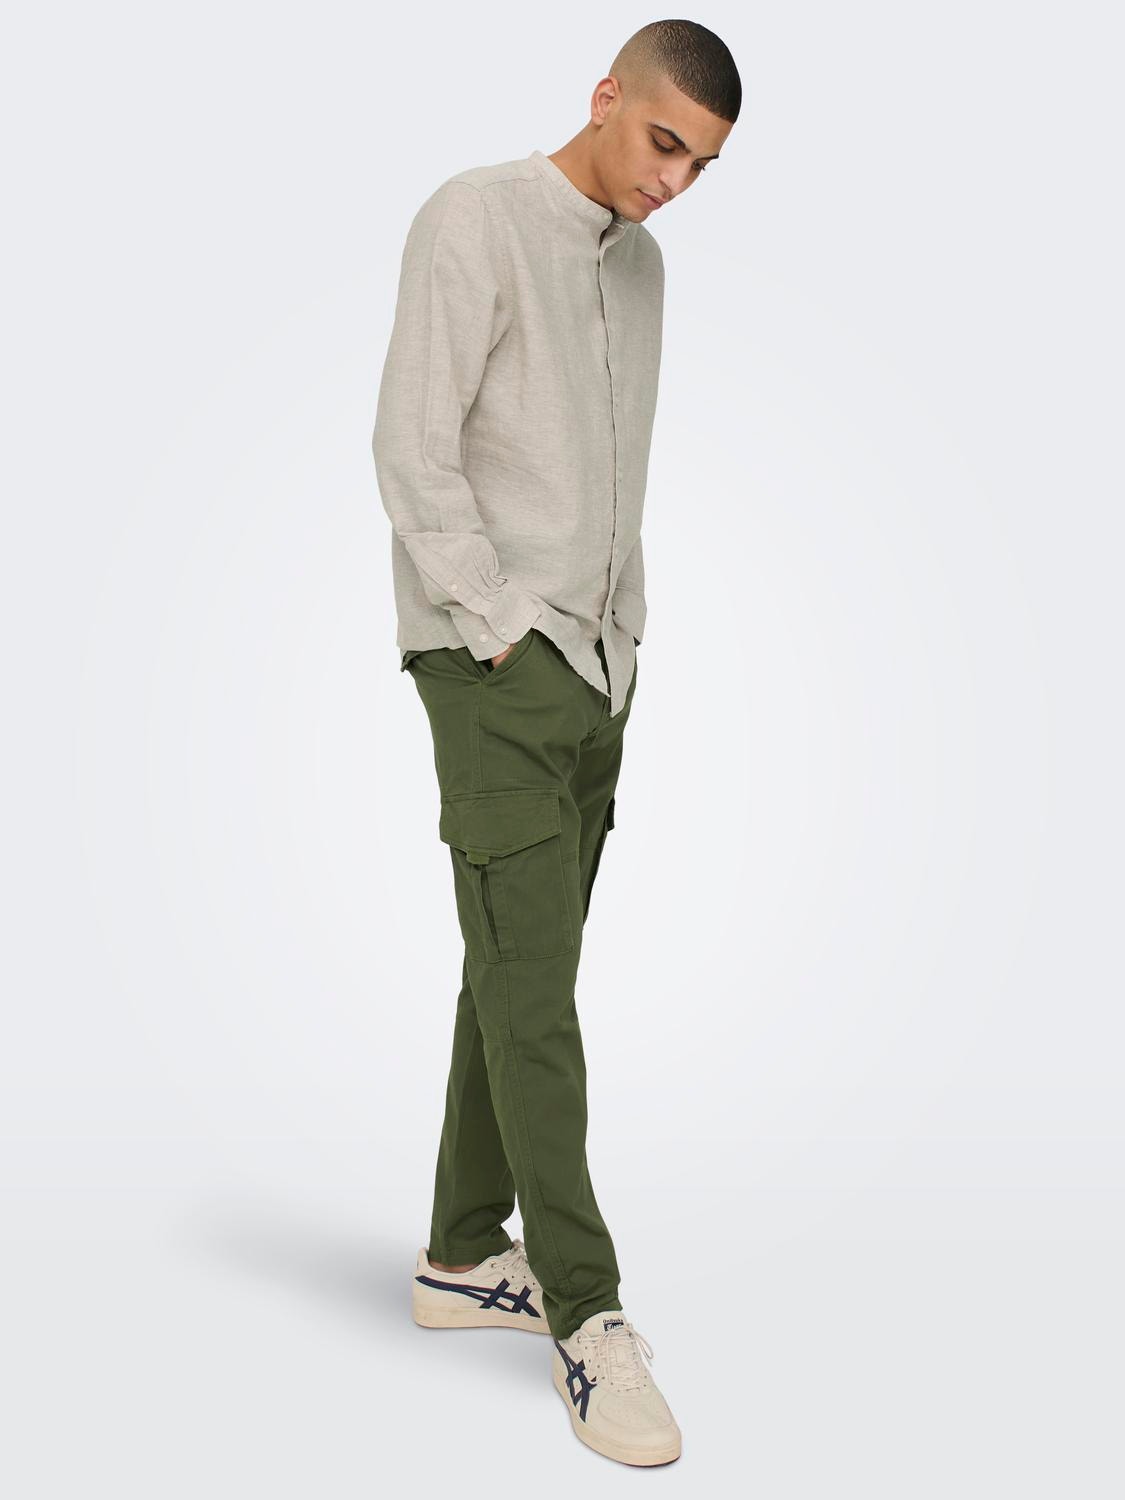 ONLY & SONS ONSDEAN LIFE TAP CARGO 0032 PANT NOOS -Olive Night - 22025431